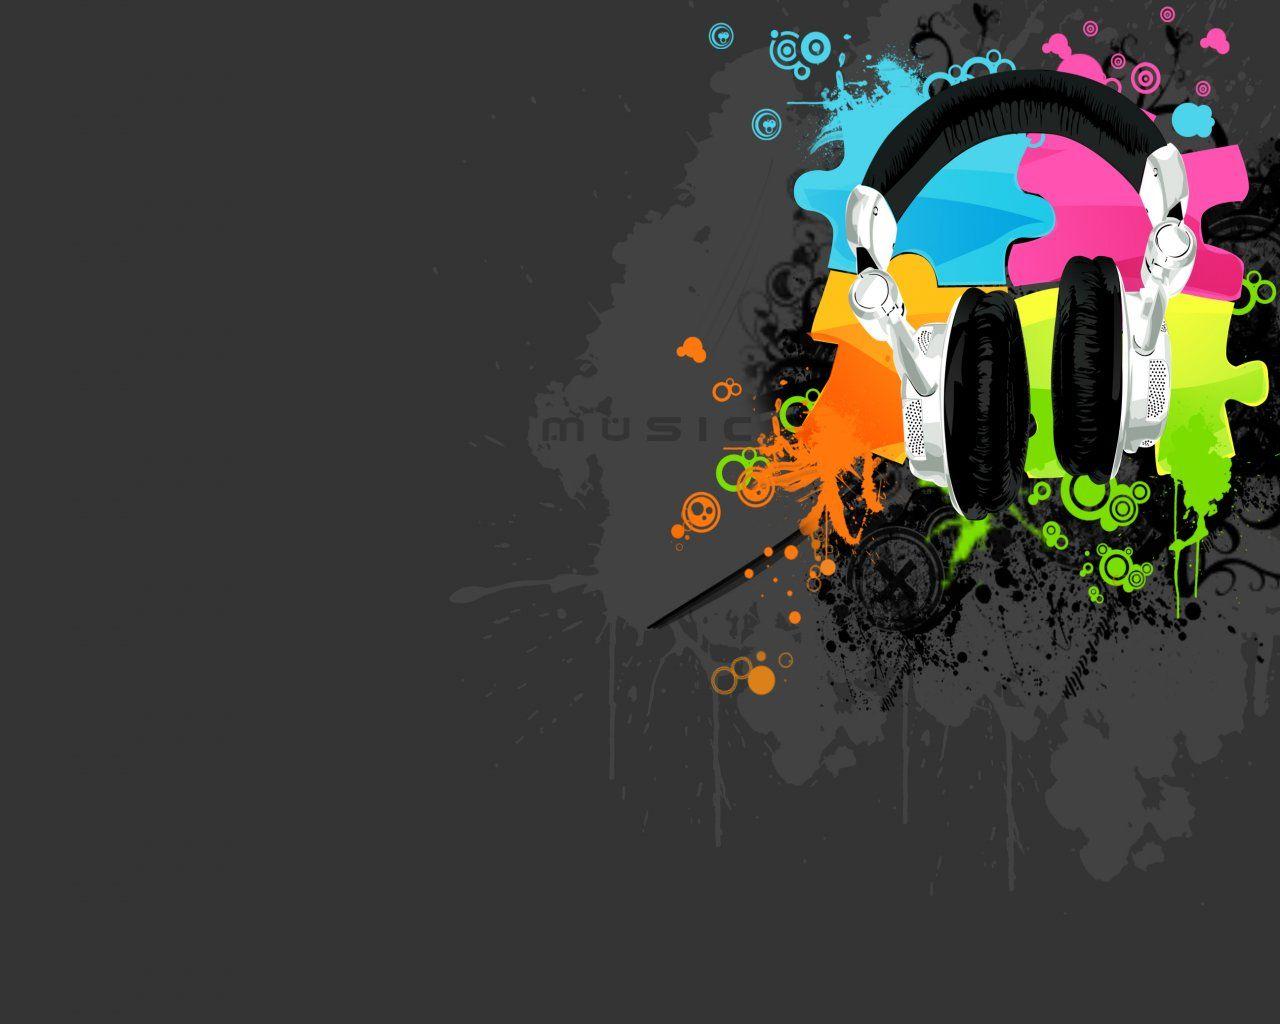 Cool music Background Wallpaper. Stuff to Buy. Music